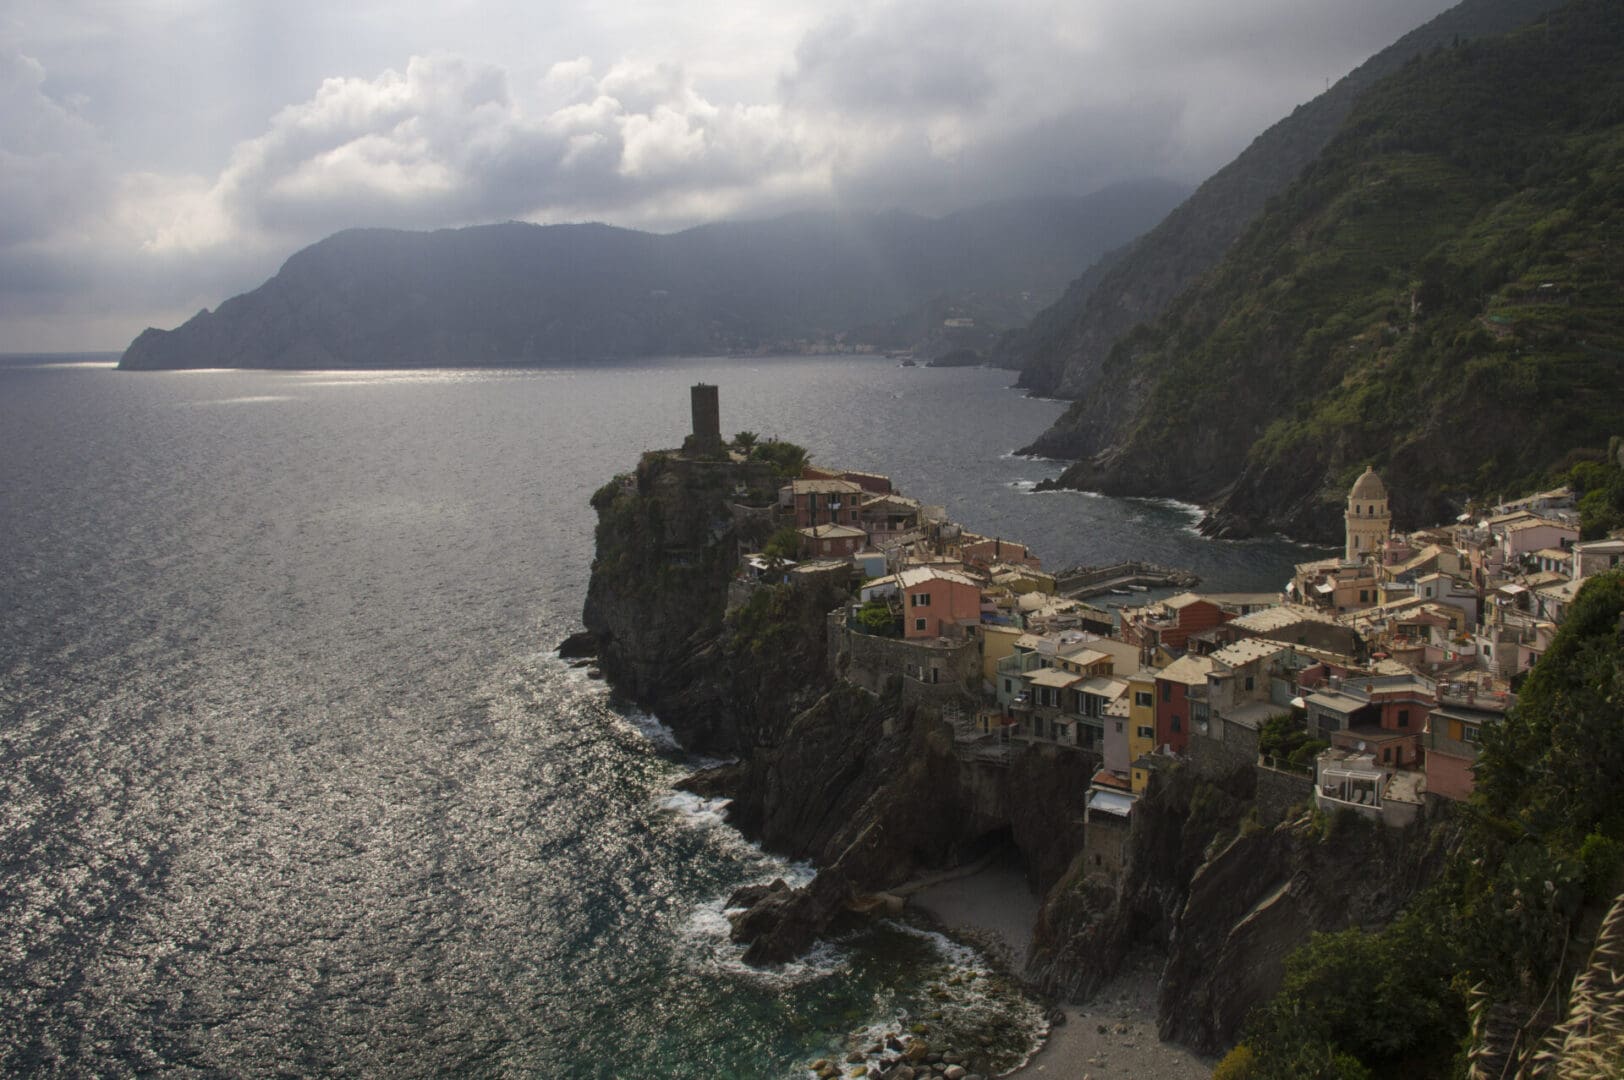 A village on a cliff overlooking the ocean.